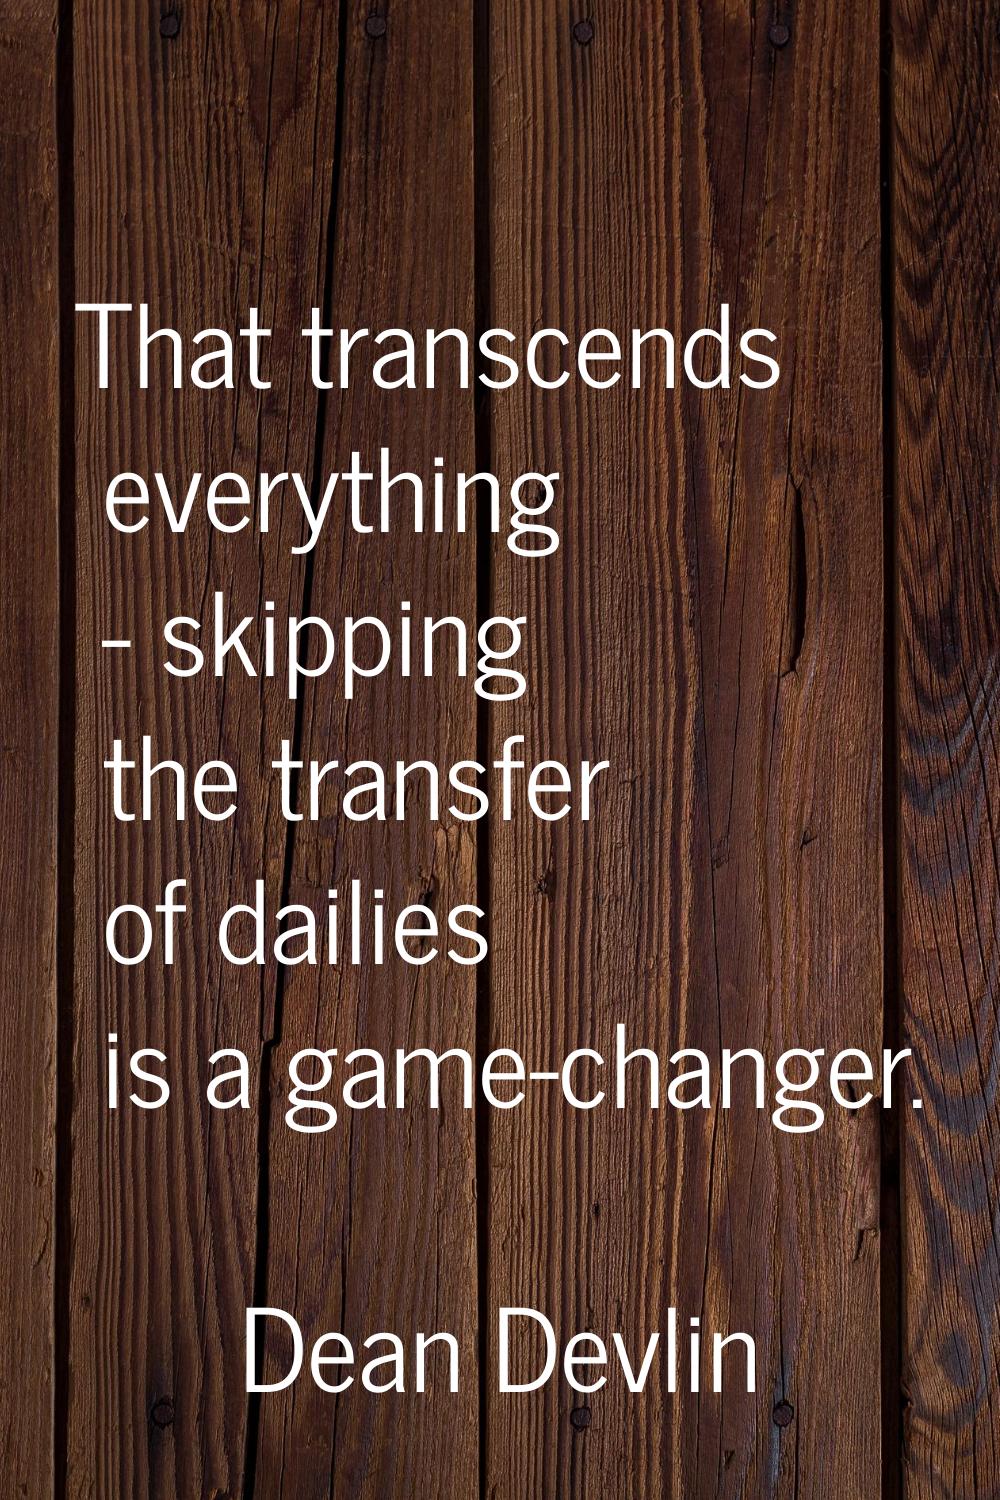 That transcends everything - skipping the transfer of dailies is a game-changer.